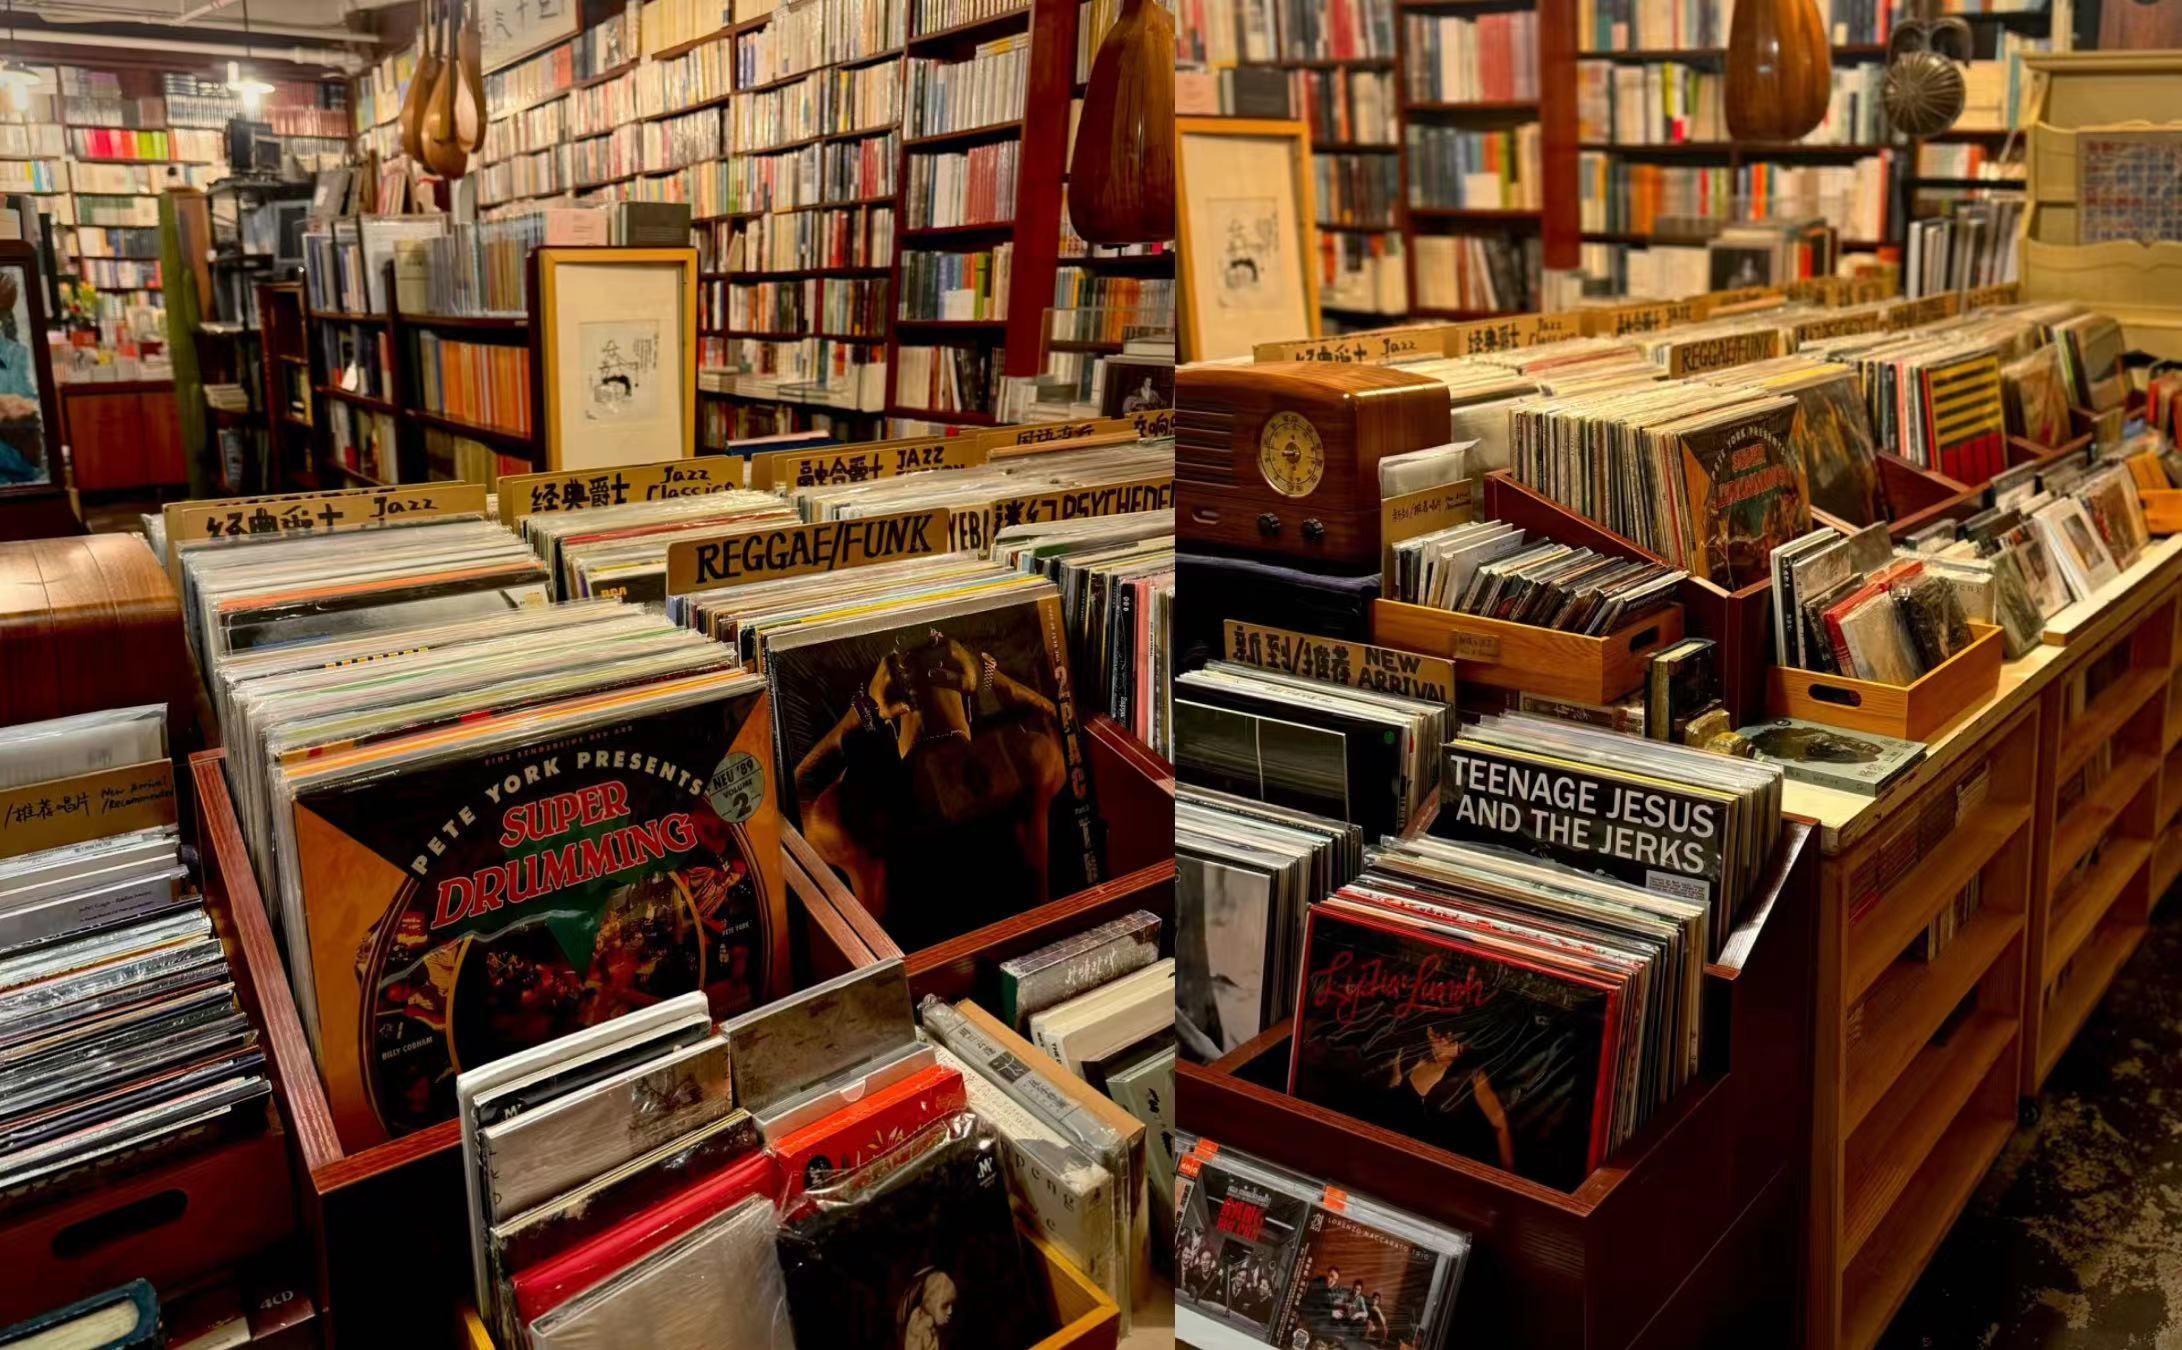  A Local Flea Market in China Where Imported Vinyl Records are Distributed